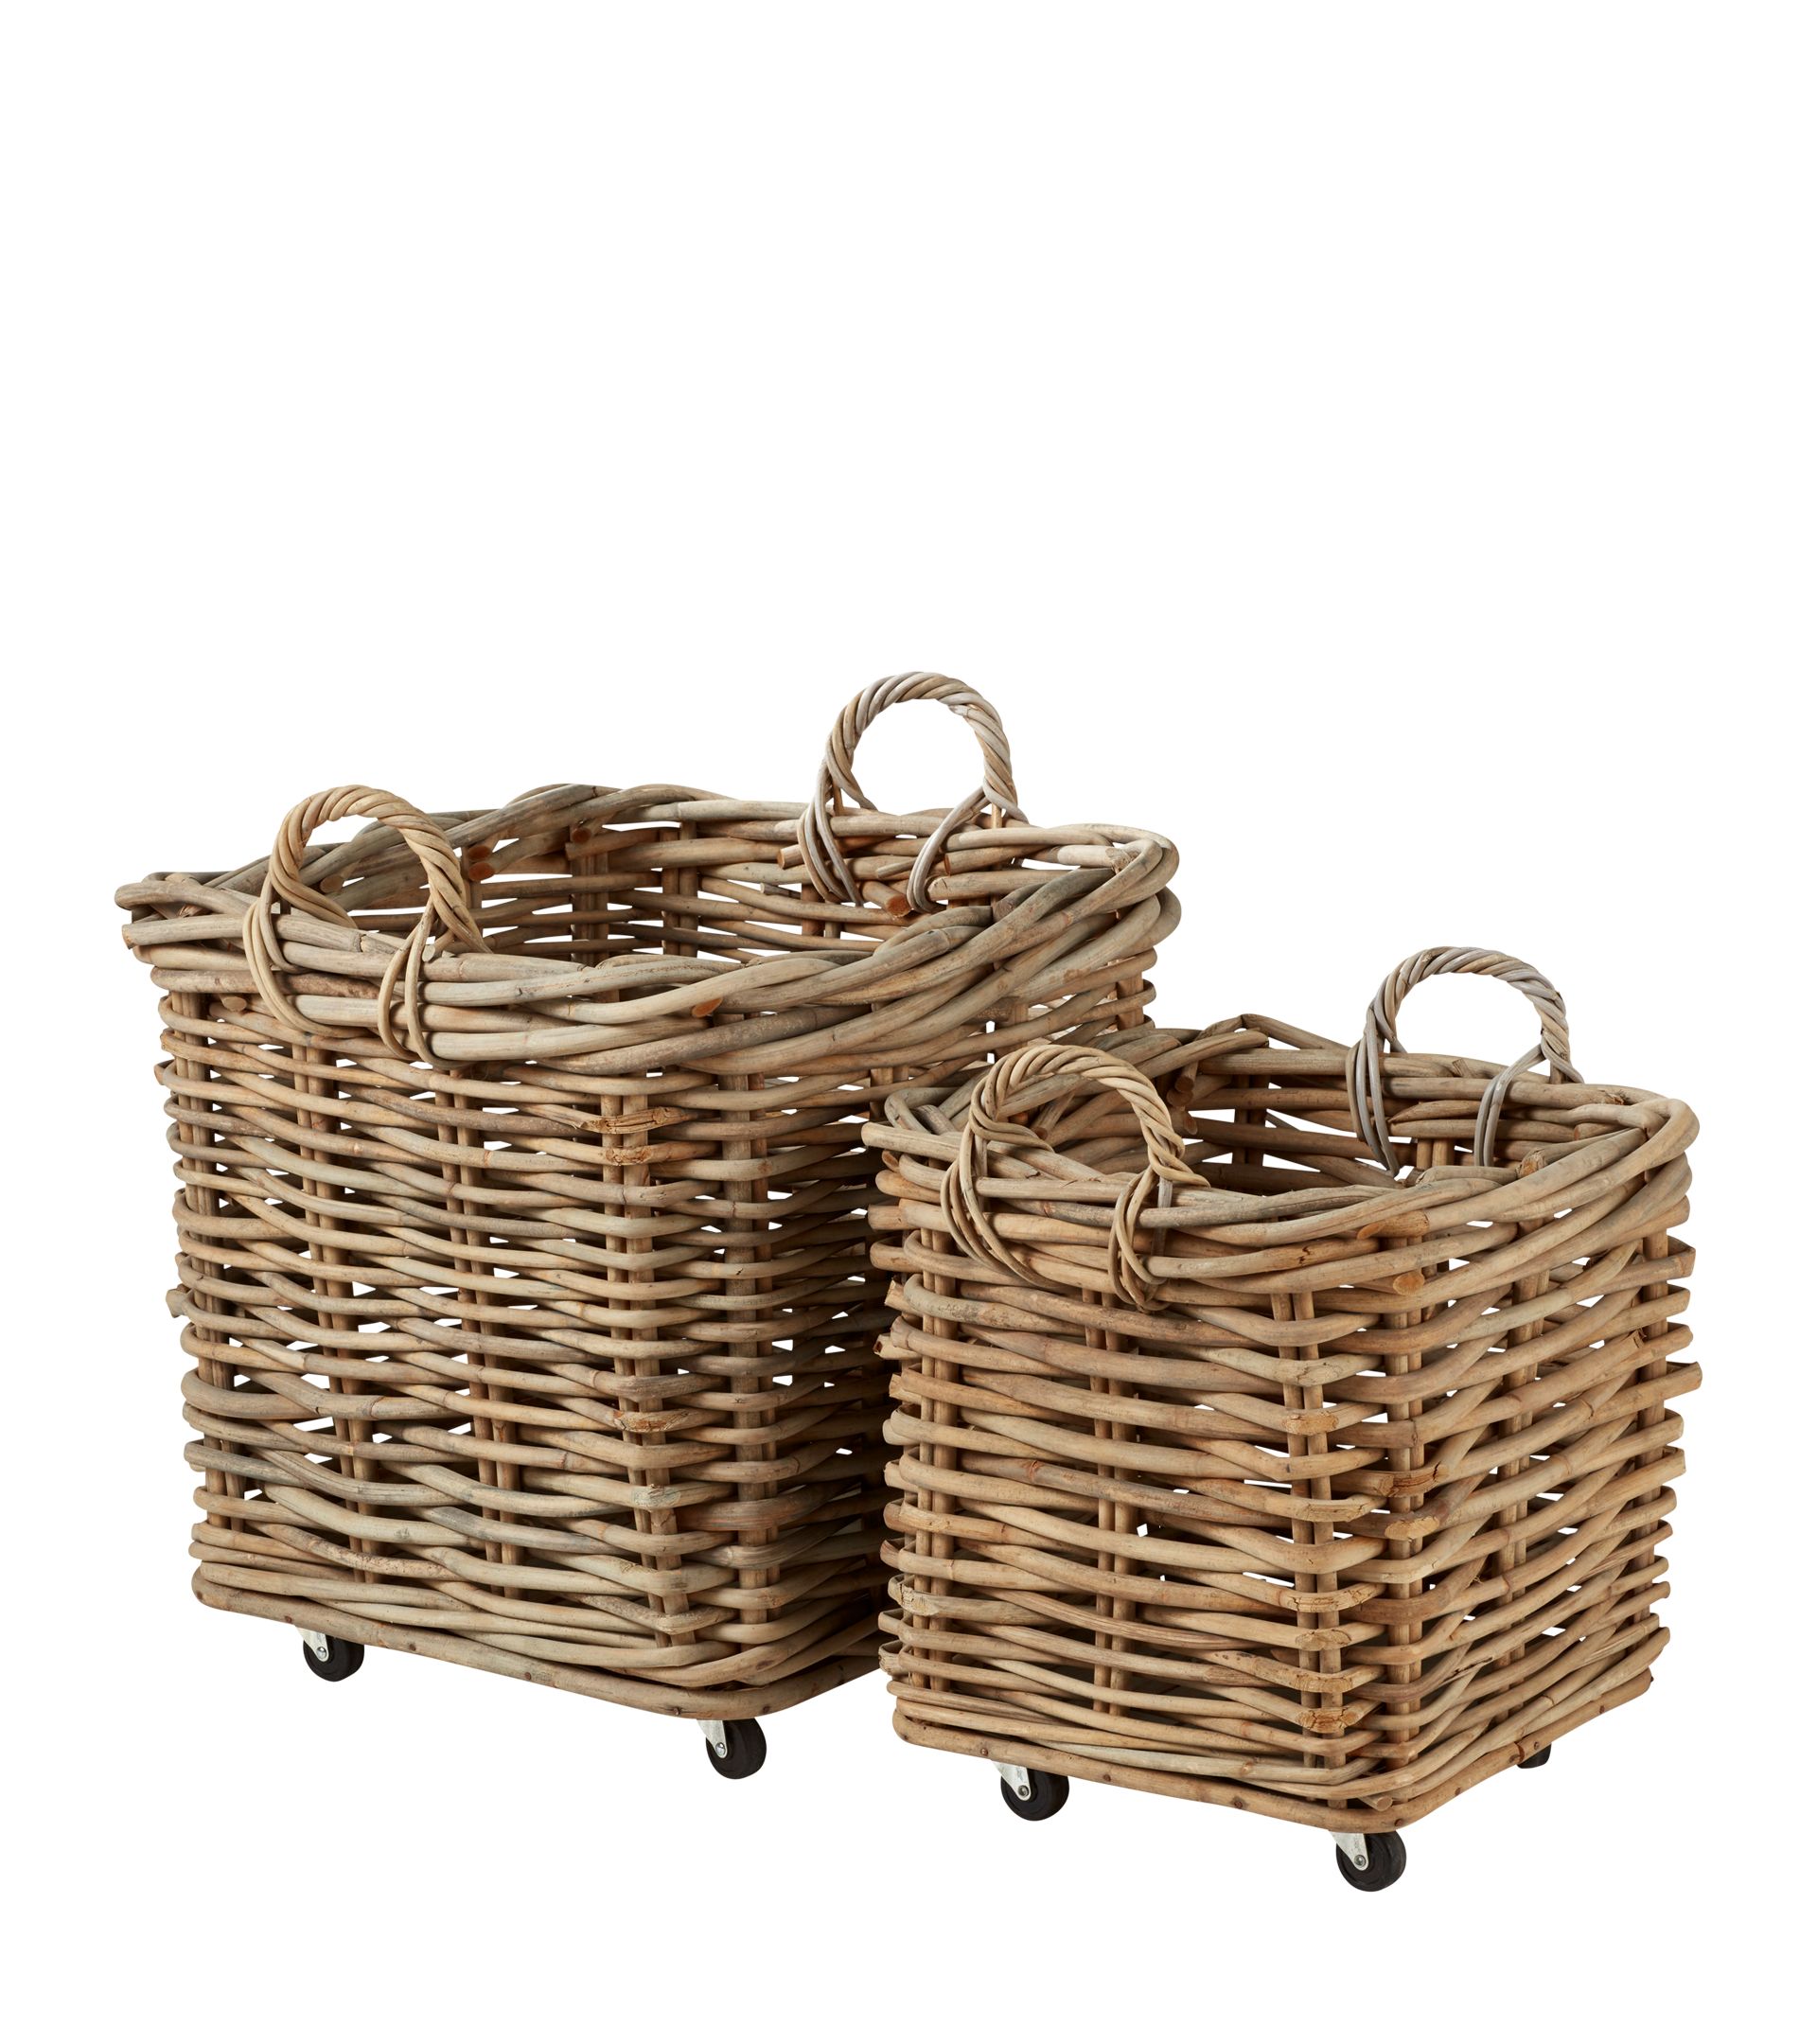 Pair of Patiner Rattan Baskets With Wheels - Stone | OKA UK